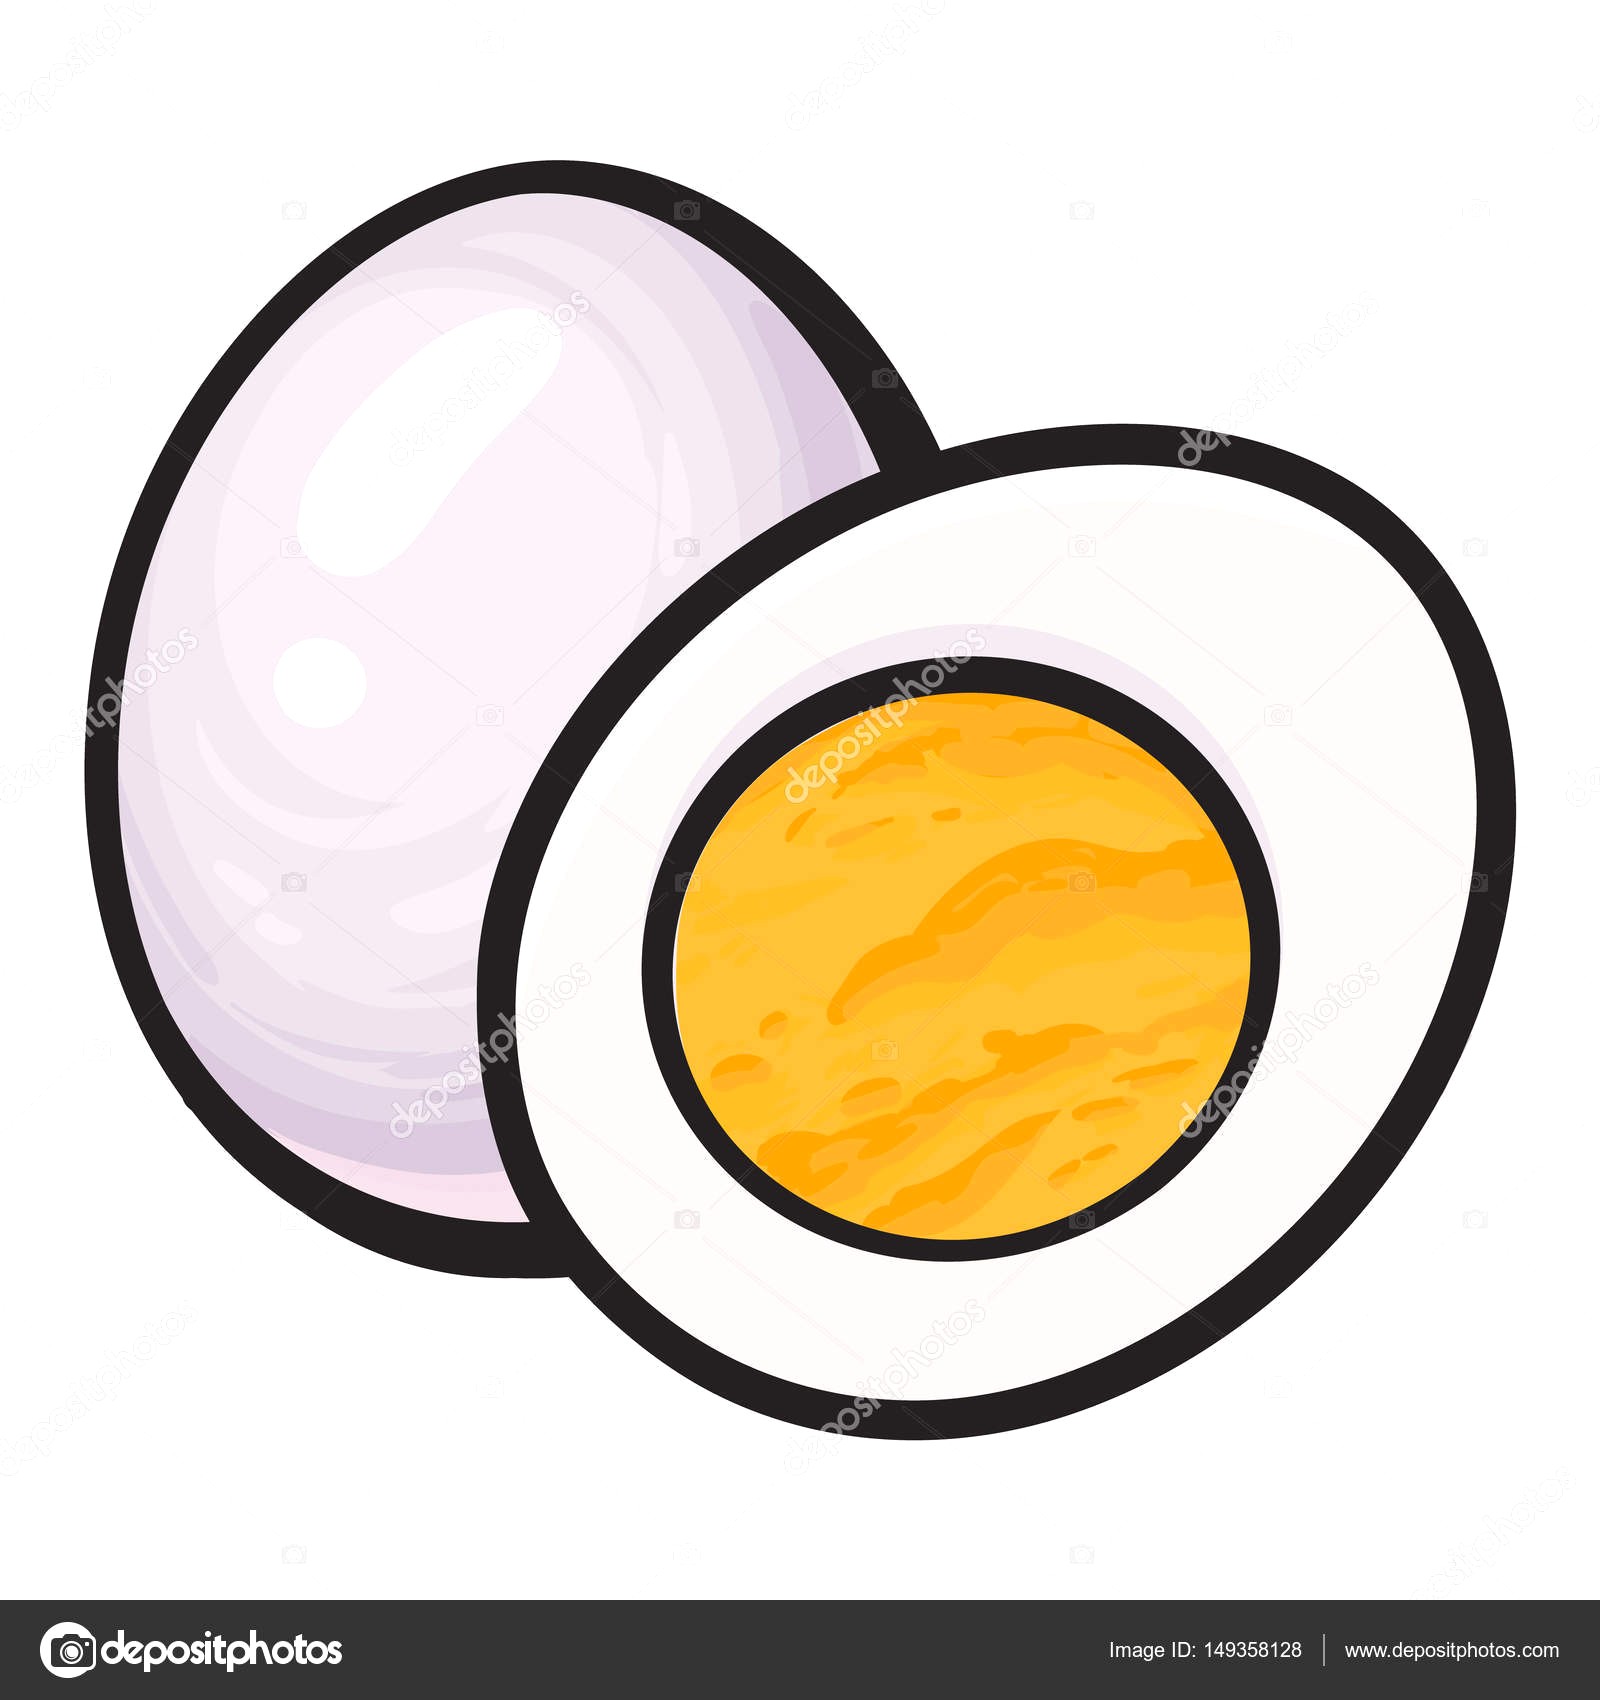 Amazing How To Draw An Egg of the decade The ultimate guide 